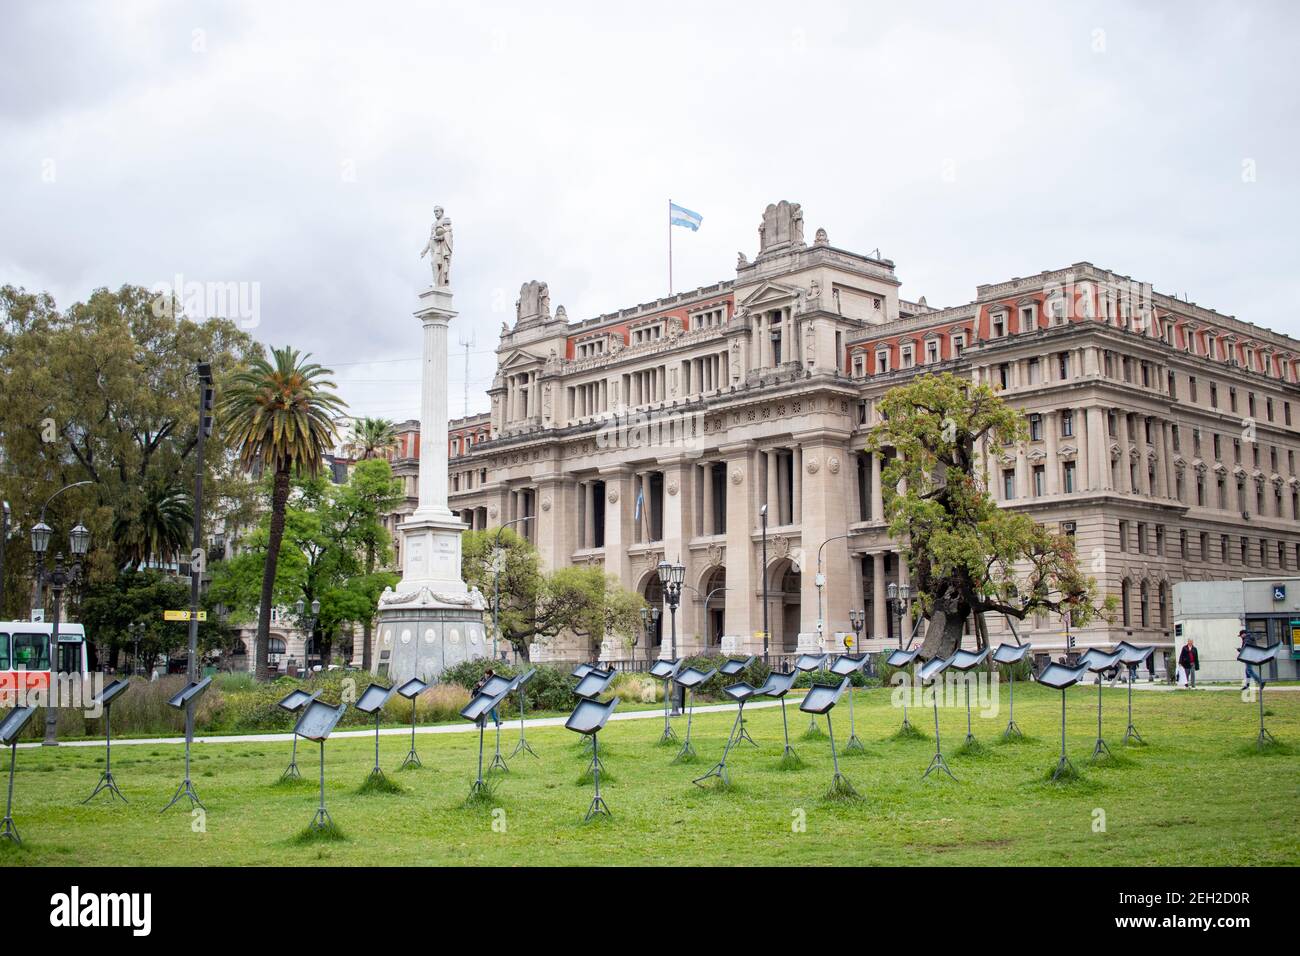 BUENOS AIRES - 15TH OCT 2019: View of the Supreme Court of Justice of the Nation, in the city of Buenos Aires in Argentina Stock Photo